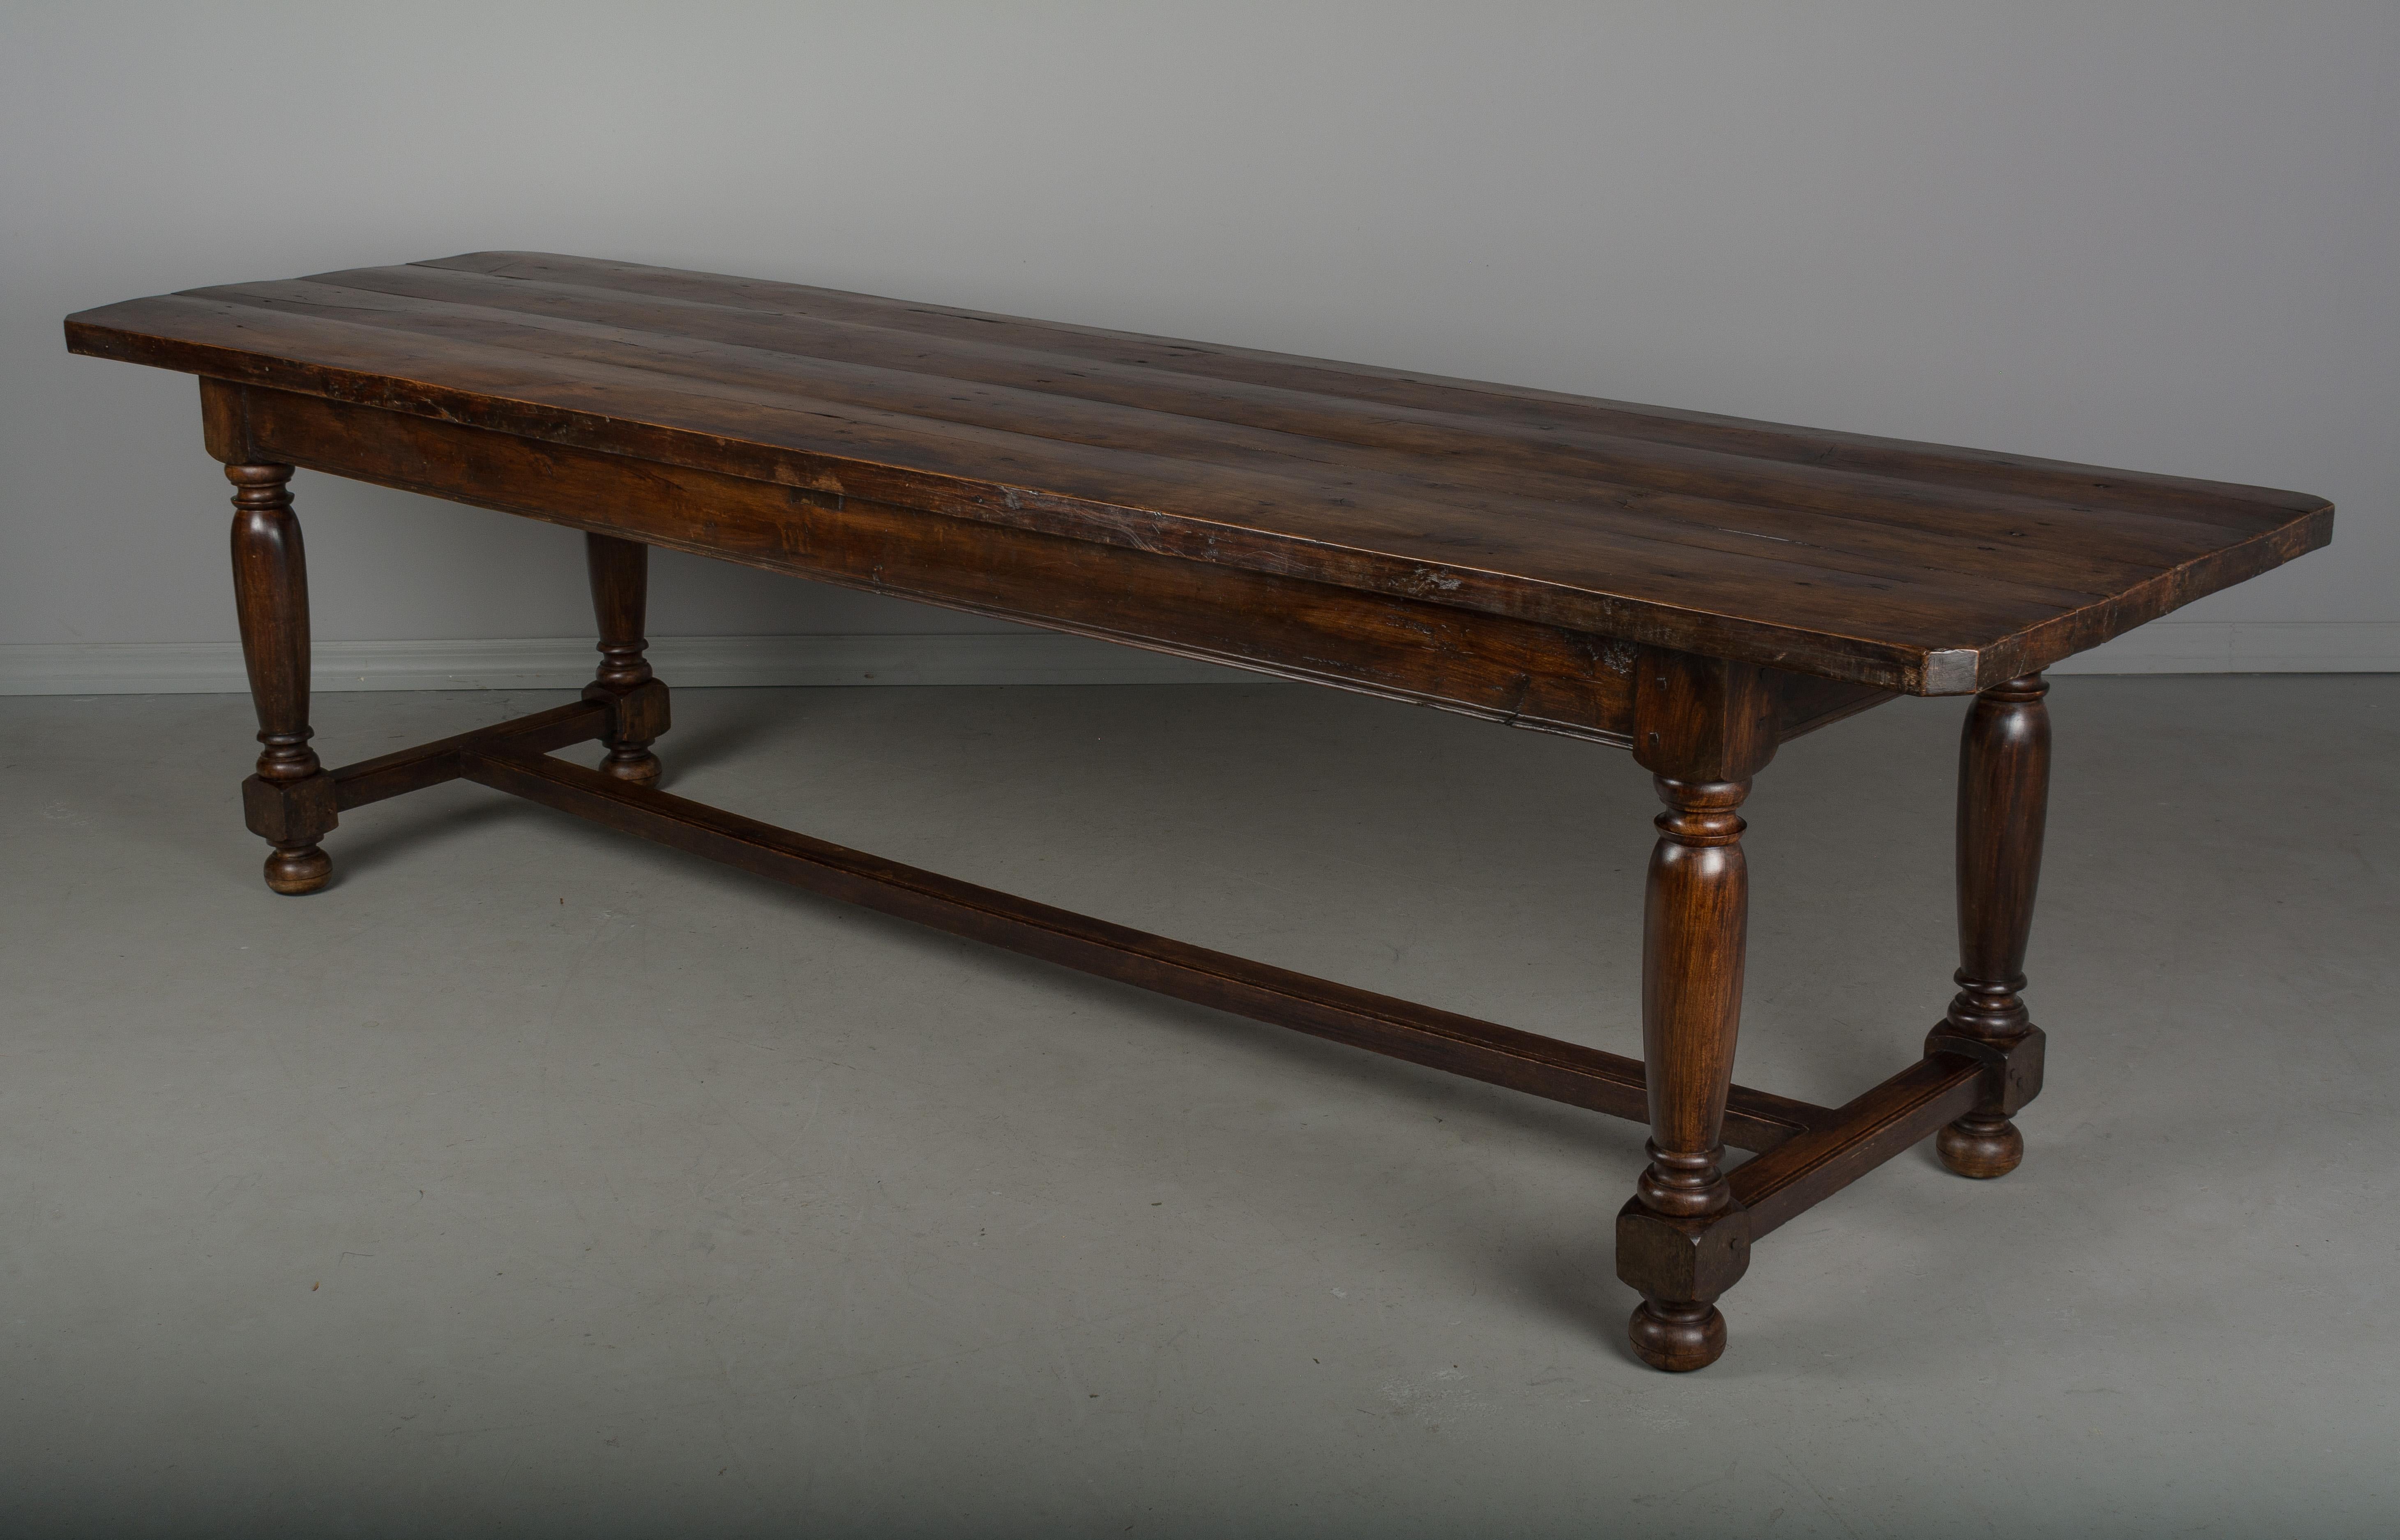 A long French country farm table made of solid beechwood with turned legs and stretcher. A heavy, sturdy table of excellent quality, using pegged construction. The top is made of four planks of 1-1/2 inch thick solid beechwood. Waxed patina. A